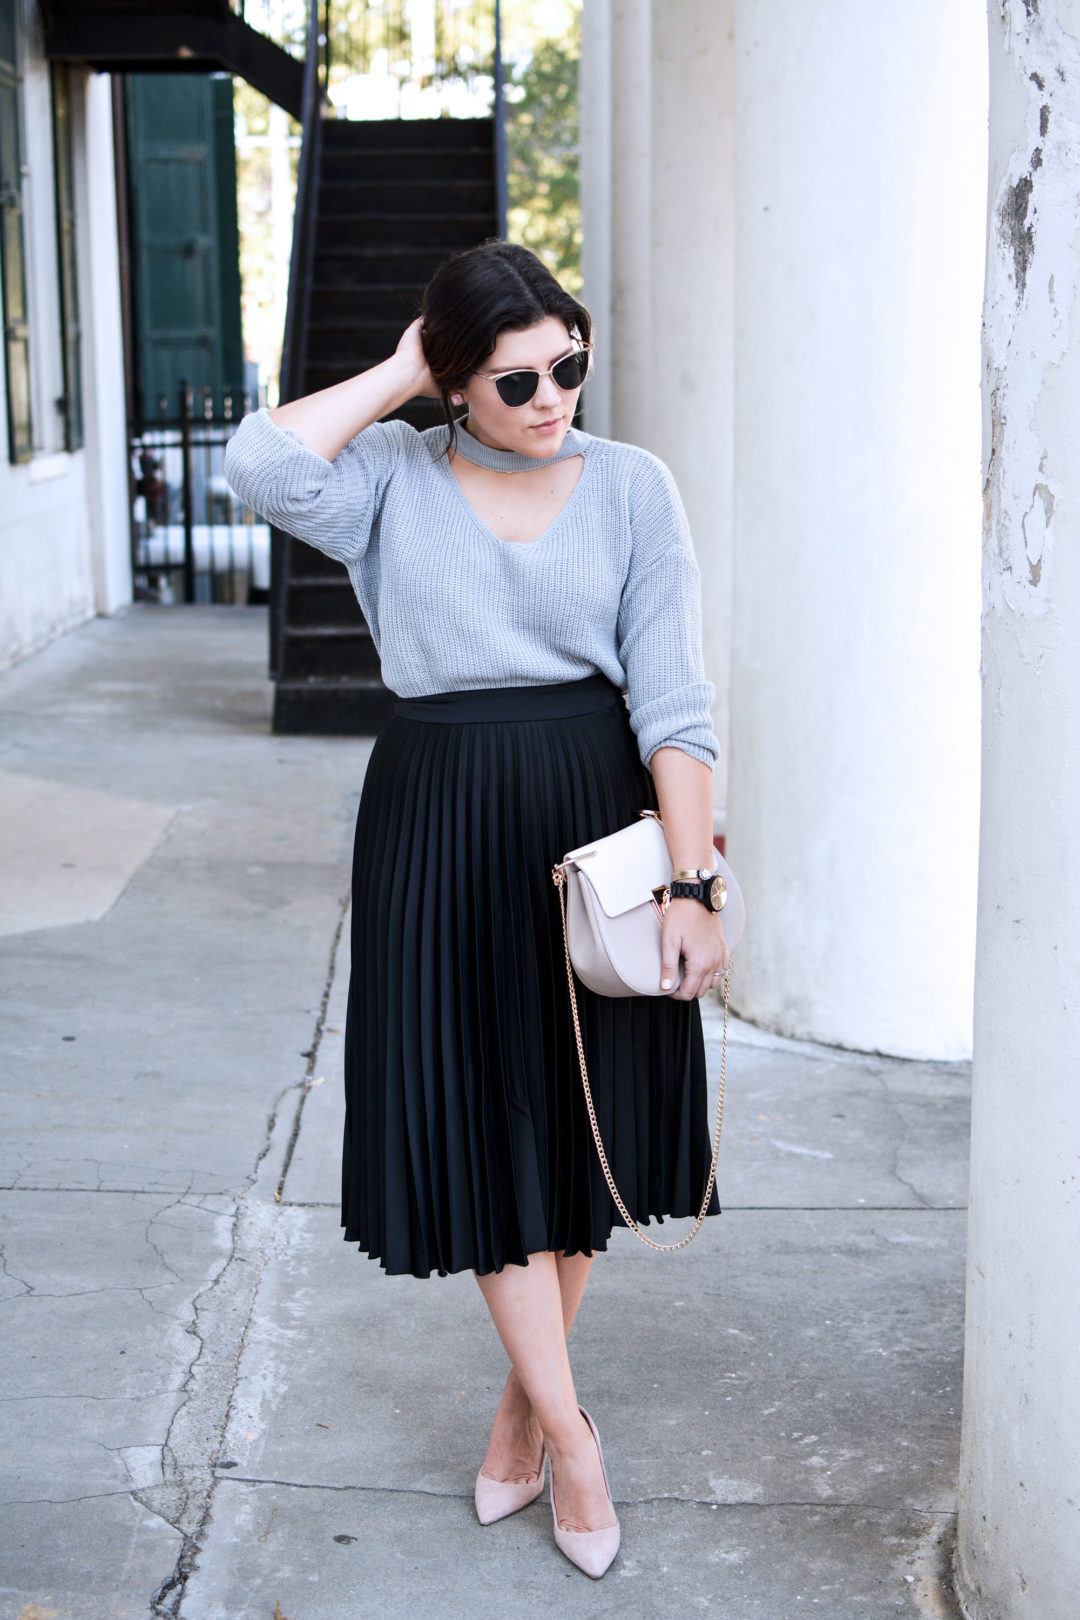 Skirts and Sweaters - Kassy On Design